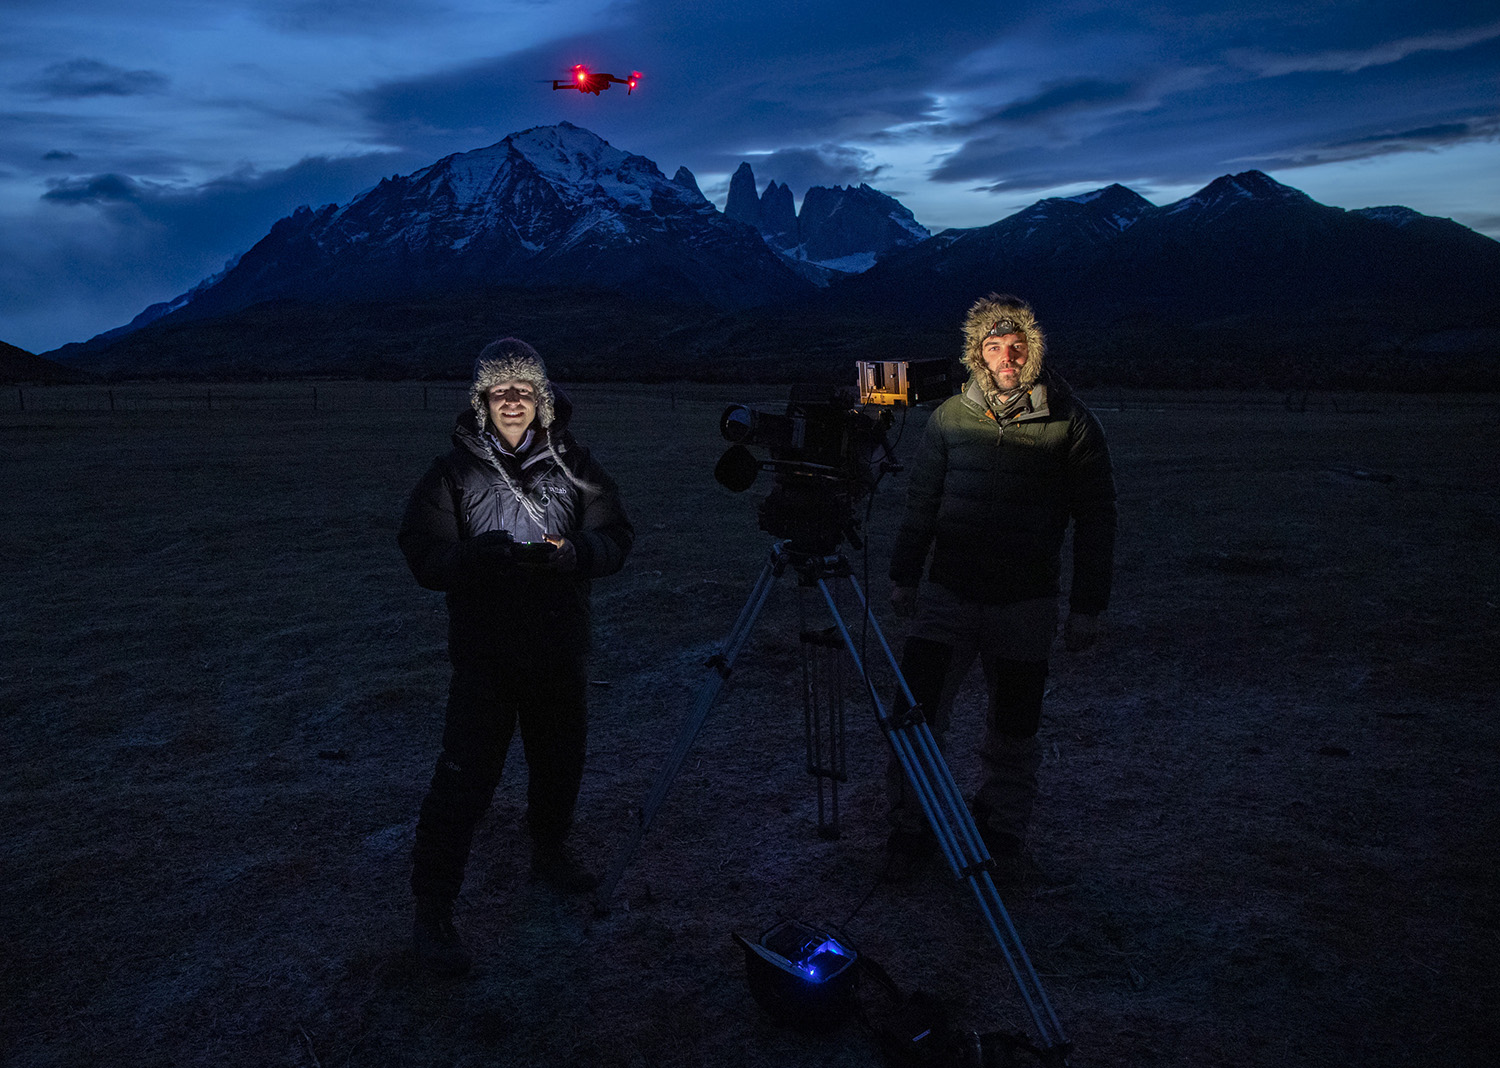 Bertie Gregory and Sam Stewart standing with camera in front of the mountains.